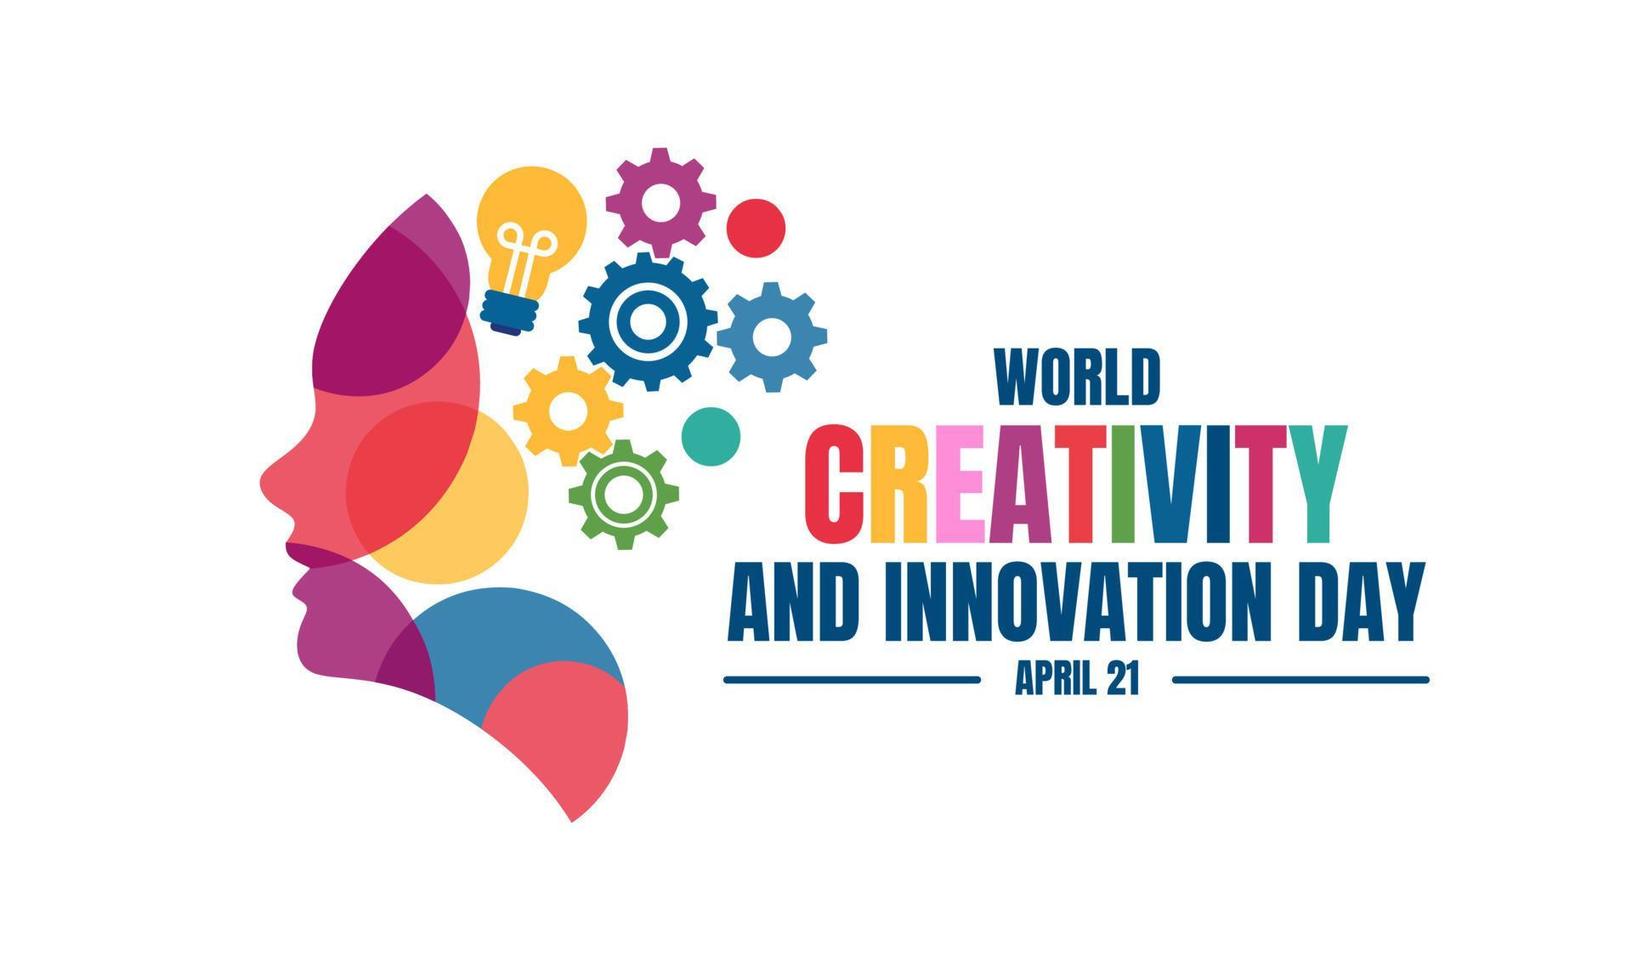 Vector illustration of a head with a bulb and cog, as a banner, poster or template on world creativity and innovation day.